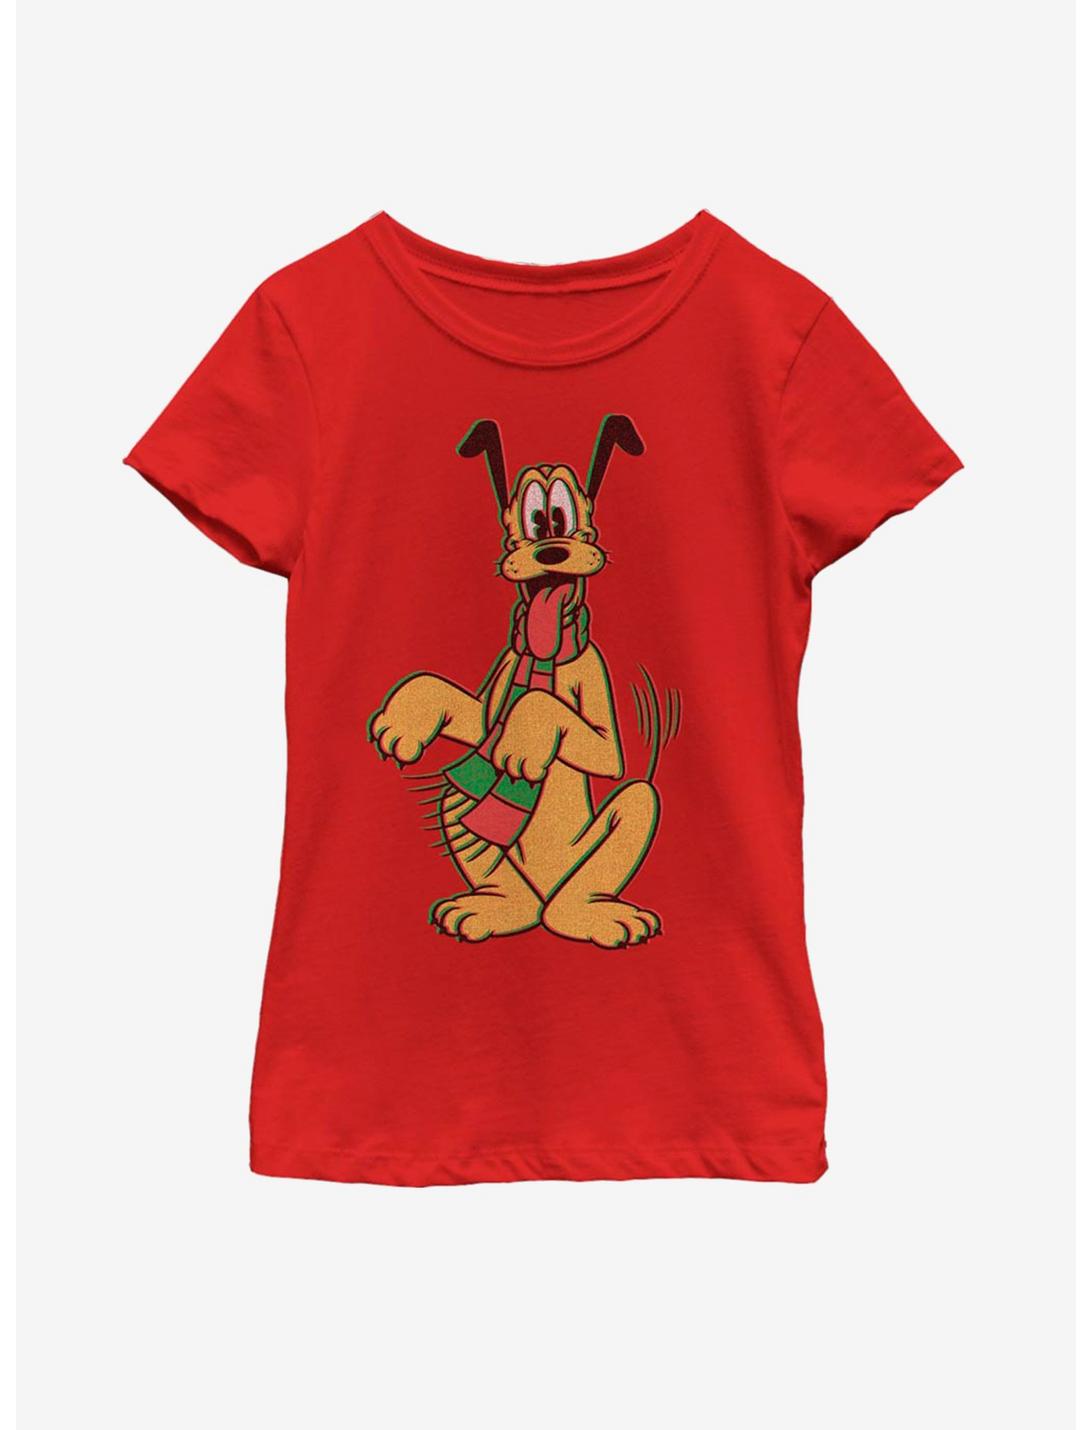 Disney Mickey Mouse Pluto Holiday Colors Youth Girls T-Shirt, RED, hi-res